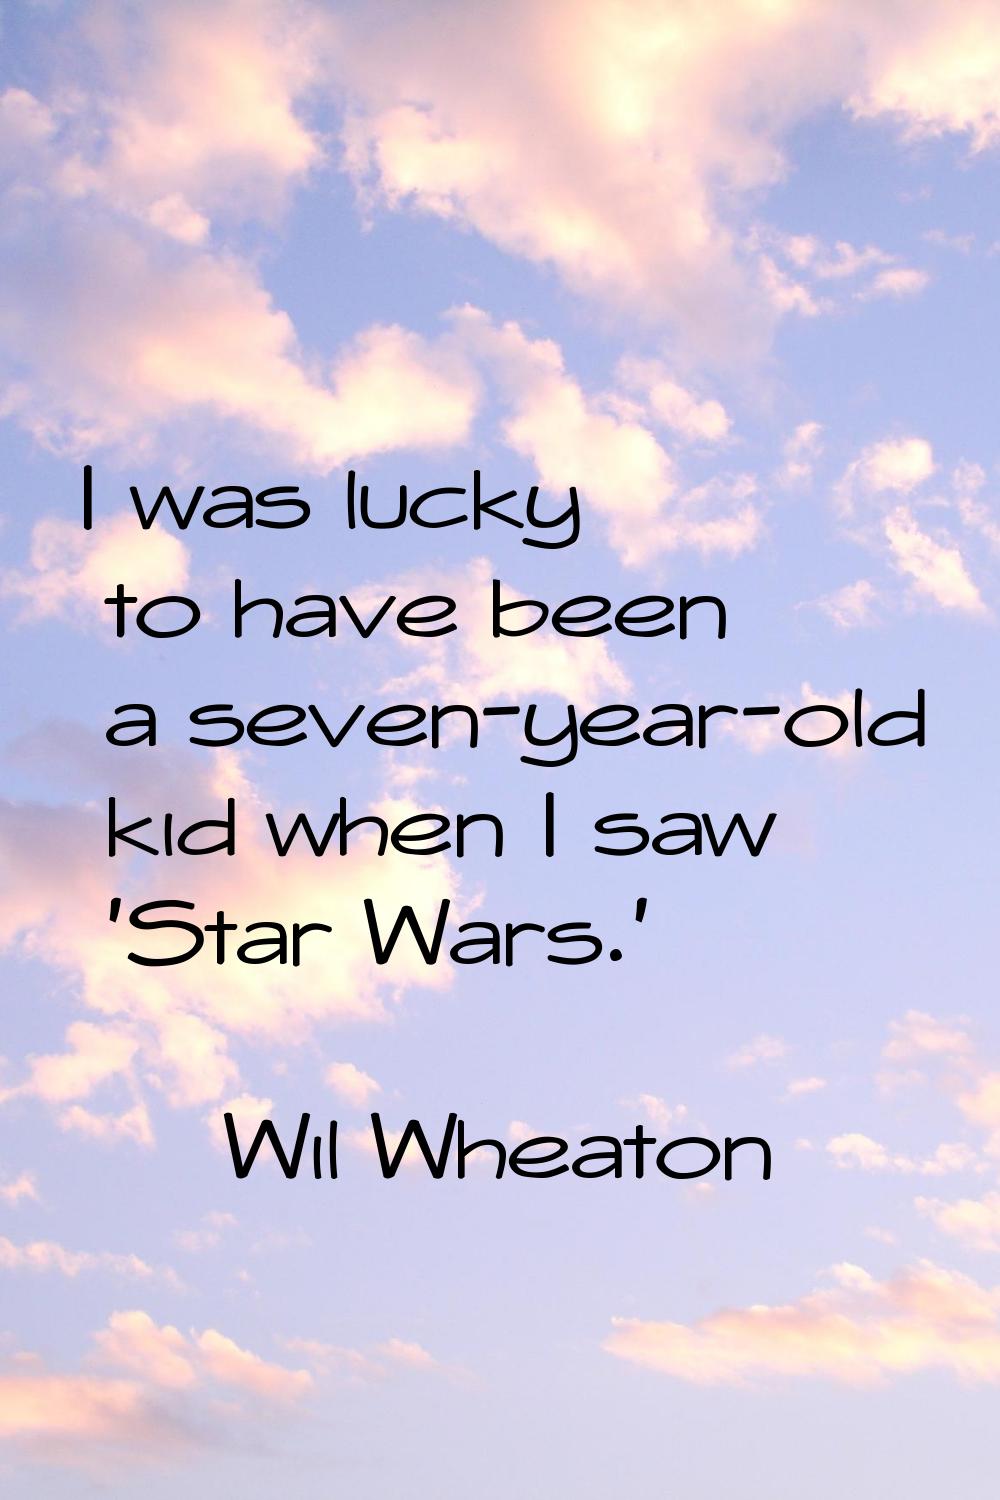 I was lucky to have been a seven-year-old kid when I saw 'Star Wars.'